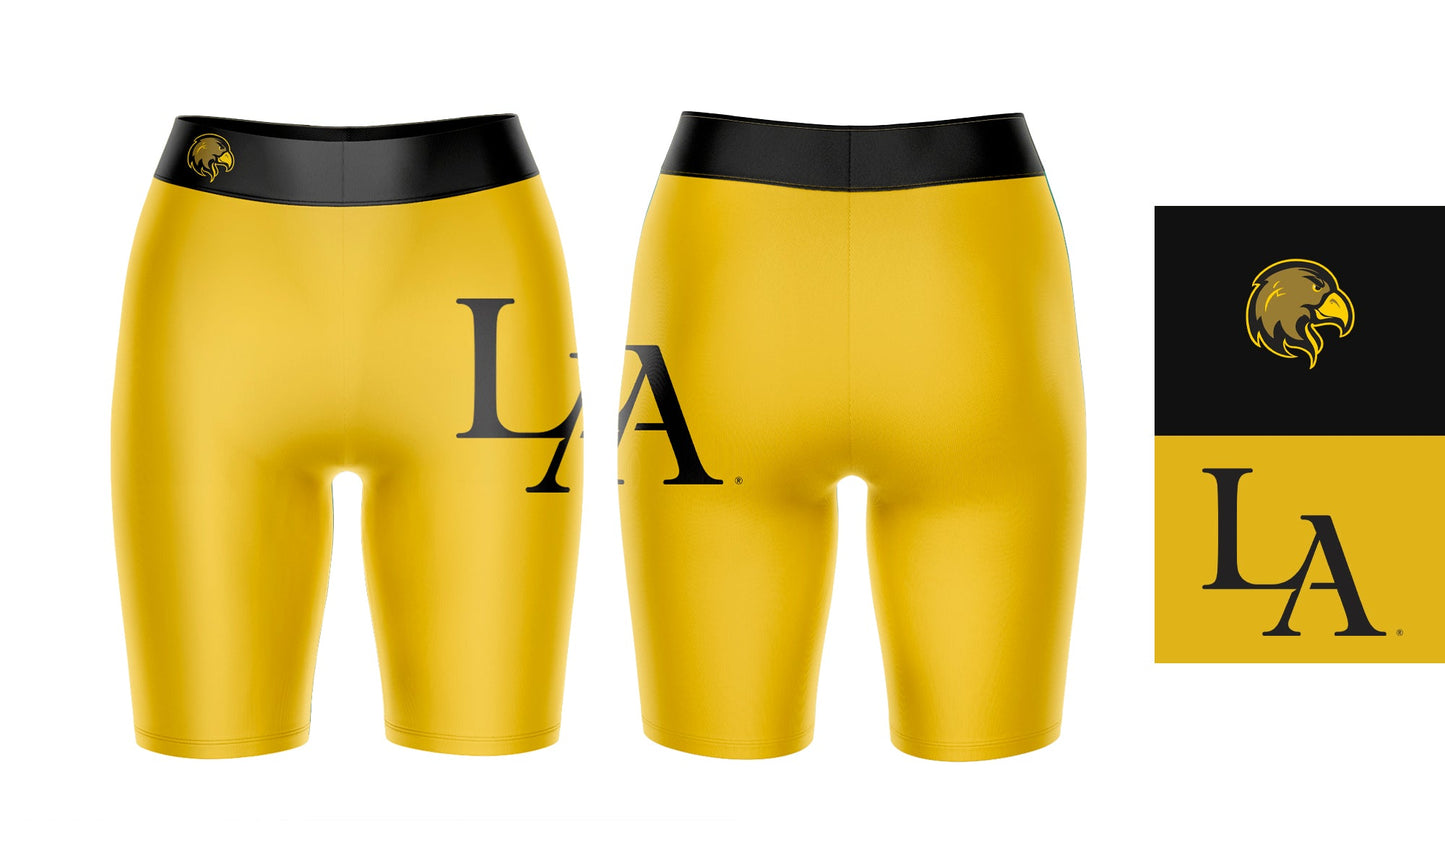 Cal State LA Golden Eagles Vive La Fete Game Day Logo on Thigh and Waistband Gold and Black Women Bike Short 9 Inseam